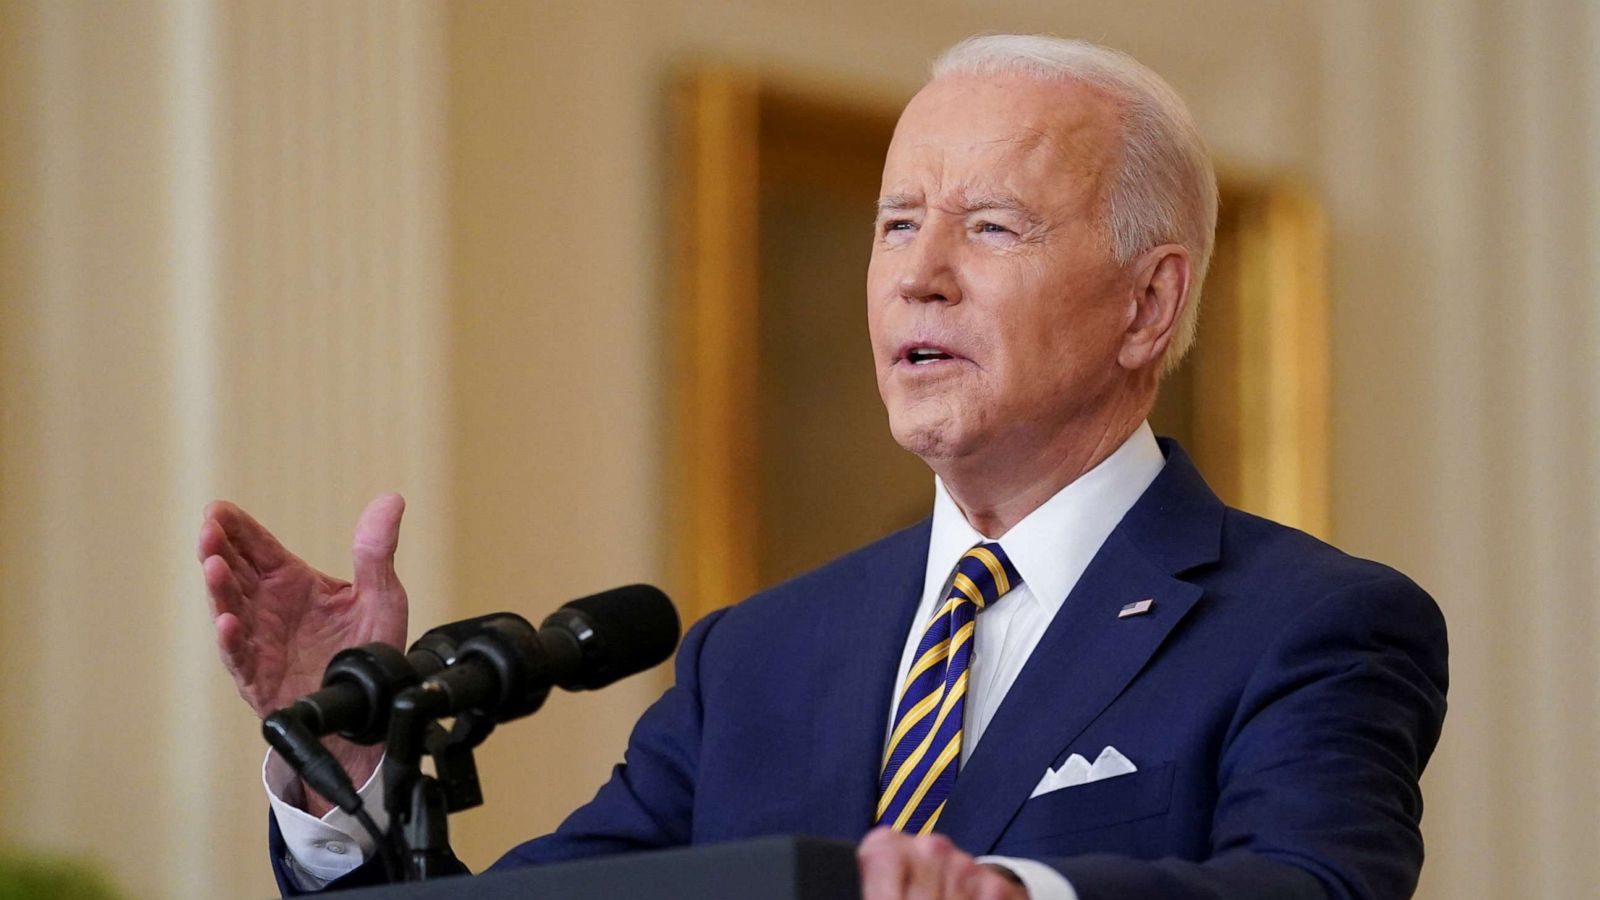 Biden ‘violating U.S. election law’ in hunt for second term